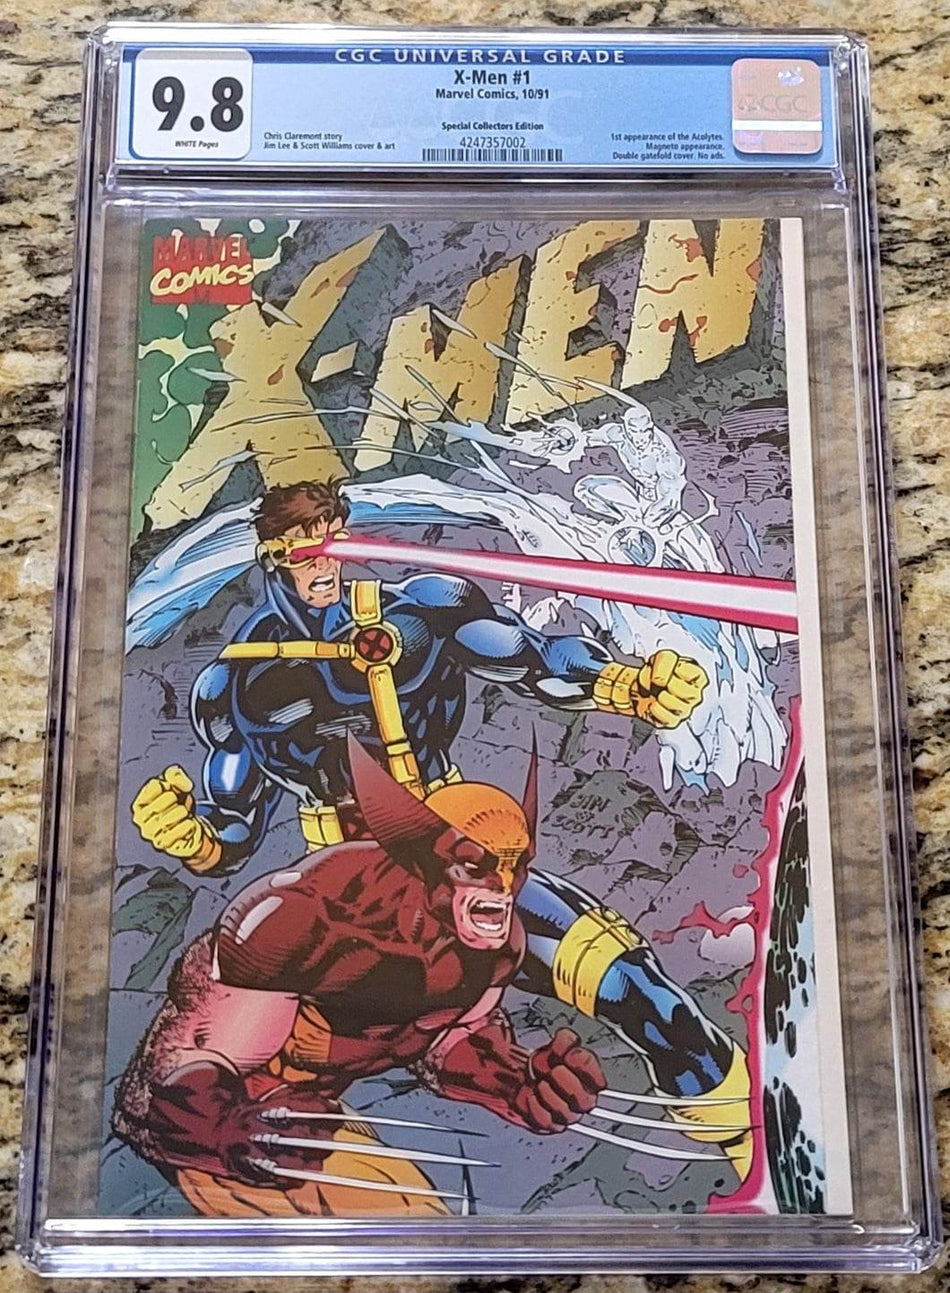 X-Men #1 (1991) Special Collectors Edition CGC 9.8 (1st Appearance of the Acolytes) Double Gatefold Cover